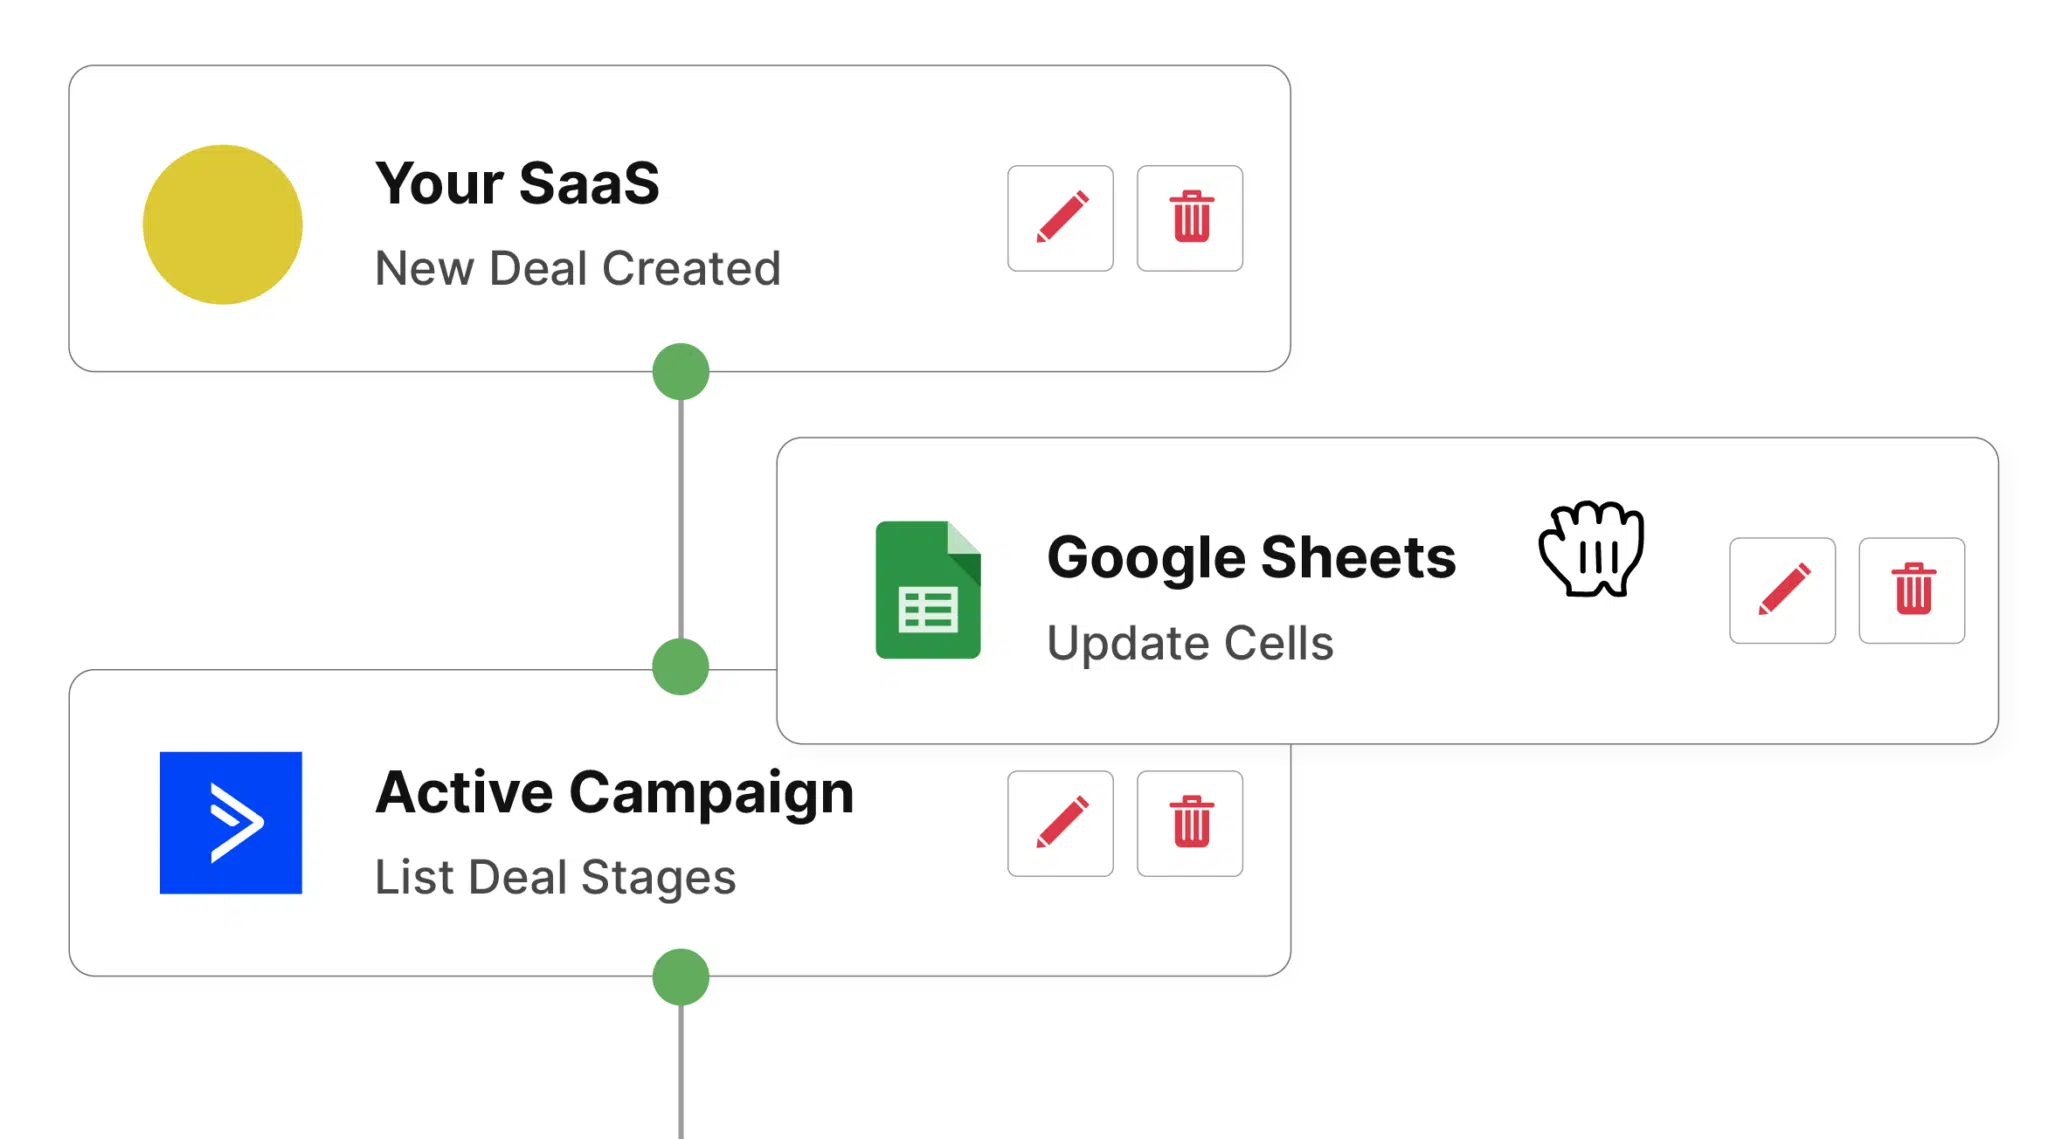 Workflow between your SaaS, ActiveCampaign and Google Sheets to log new deals